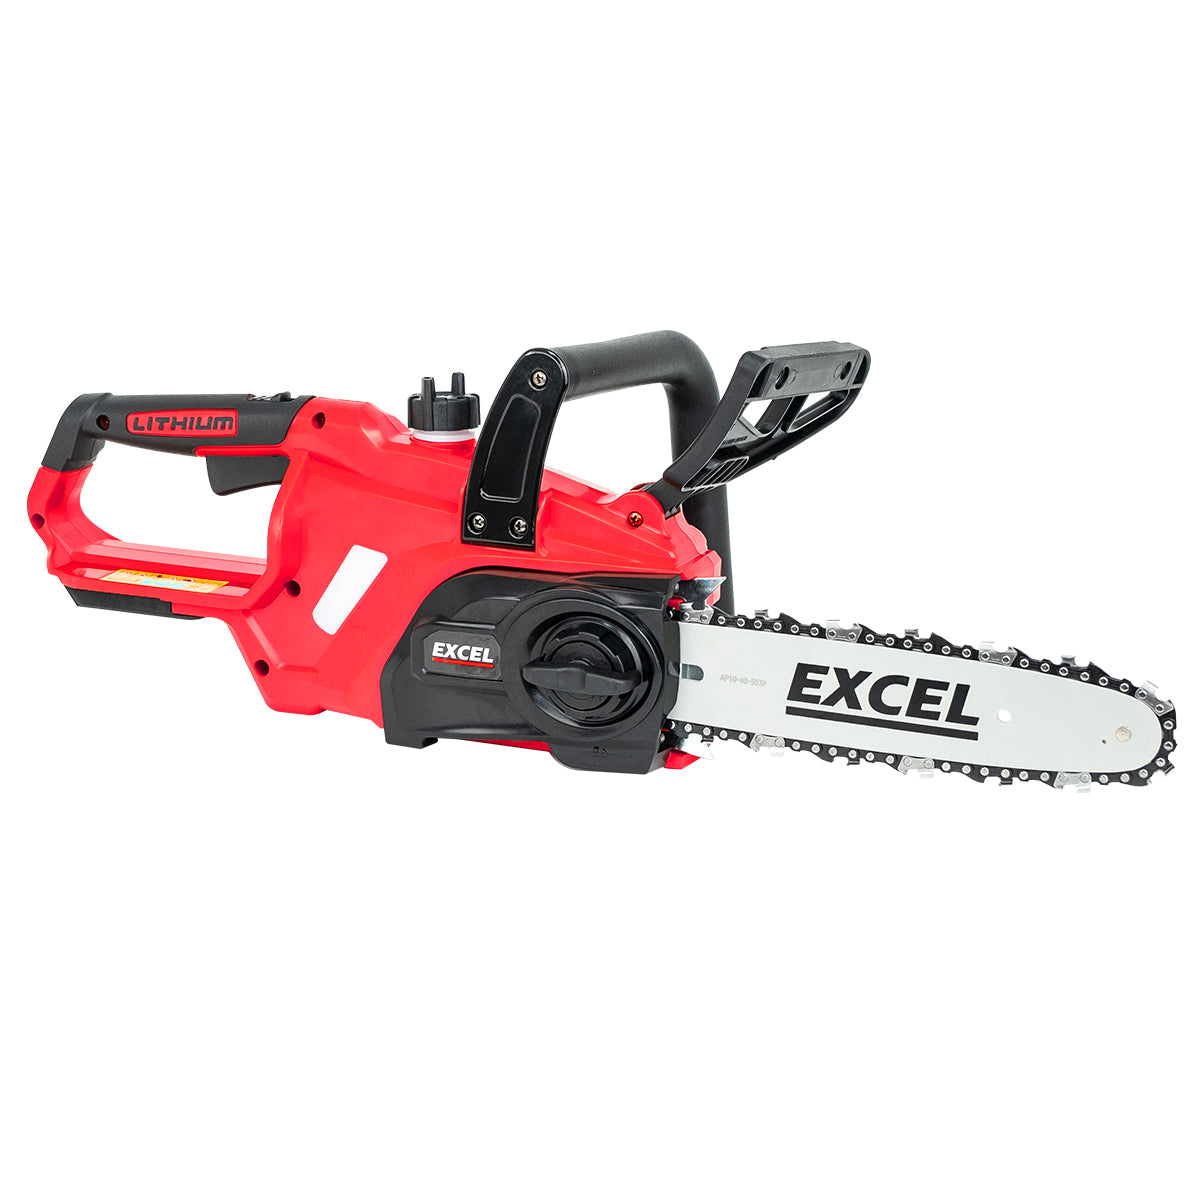 Excel 18V Chainsaw Wood Cutter 245mm with 1 x 5.0Ah Battery & Charger